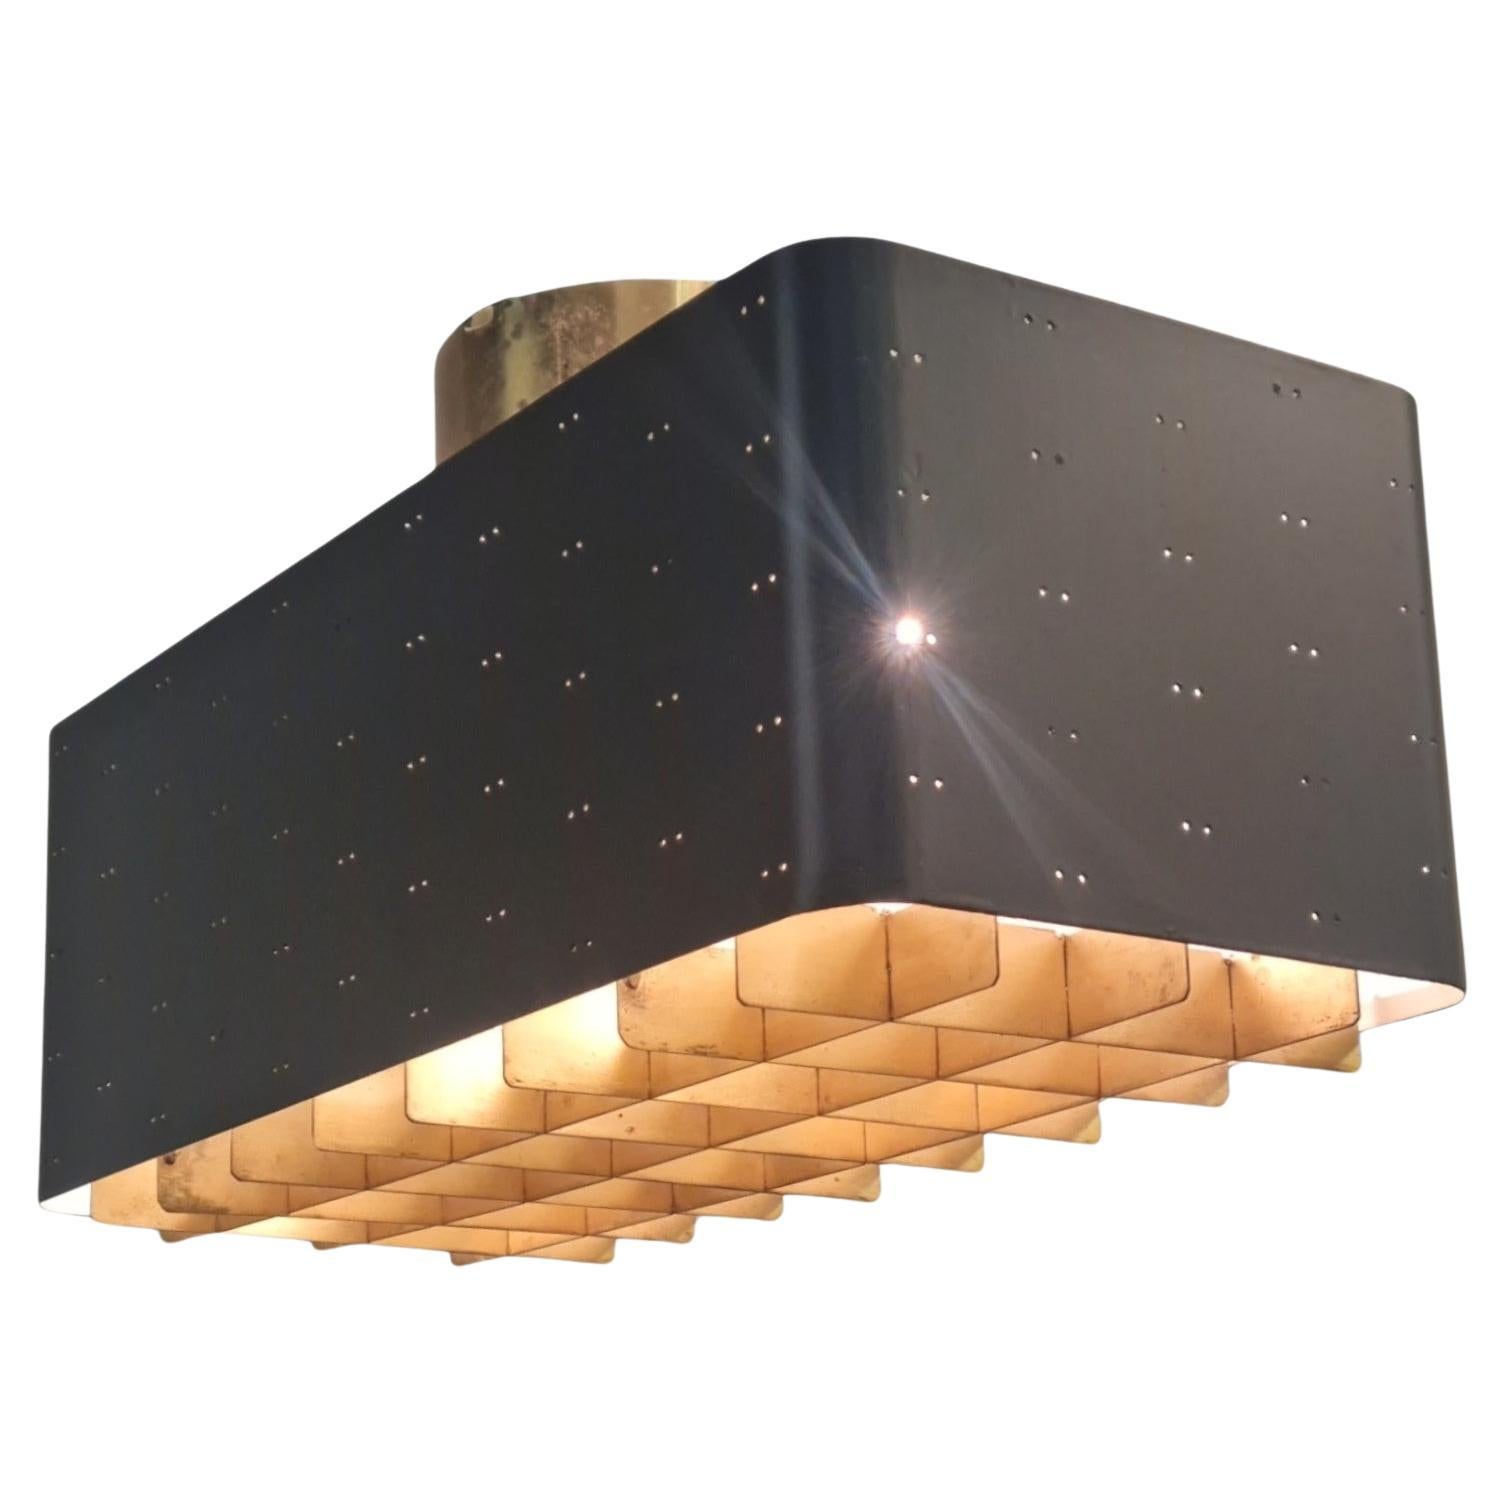 Paavo Tynell "Starry Sky" Ceiling Lamp 9068 in Black For Sale